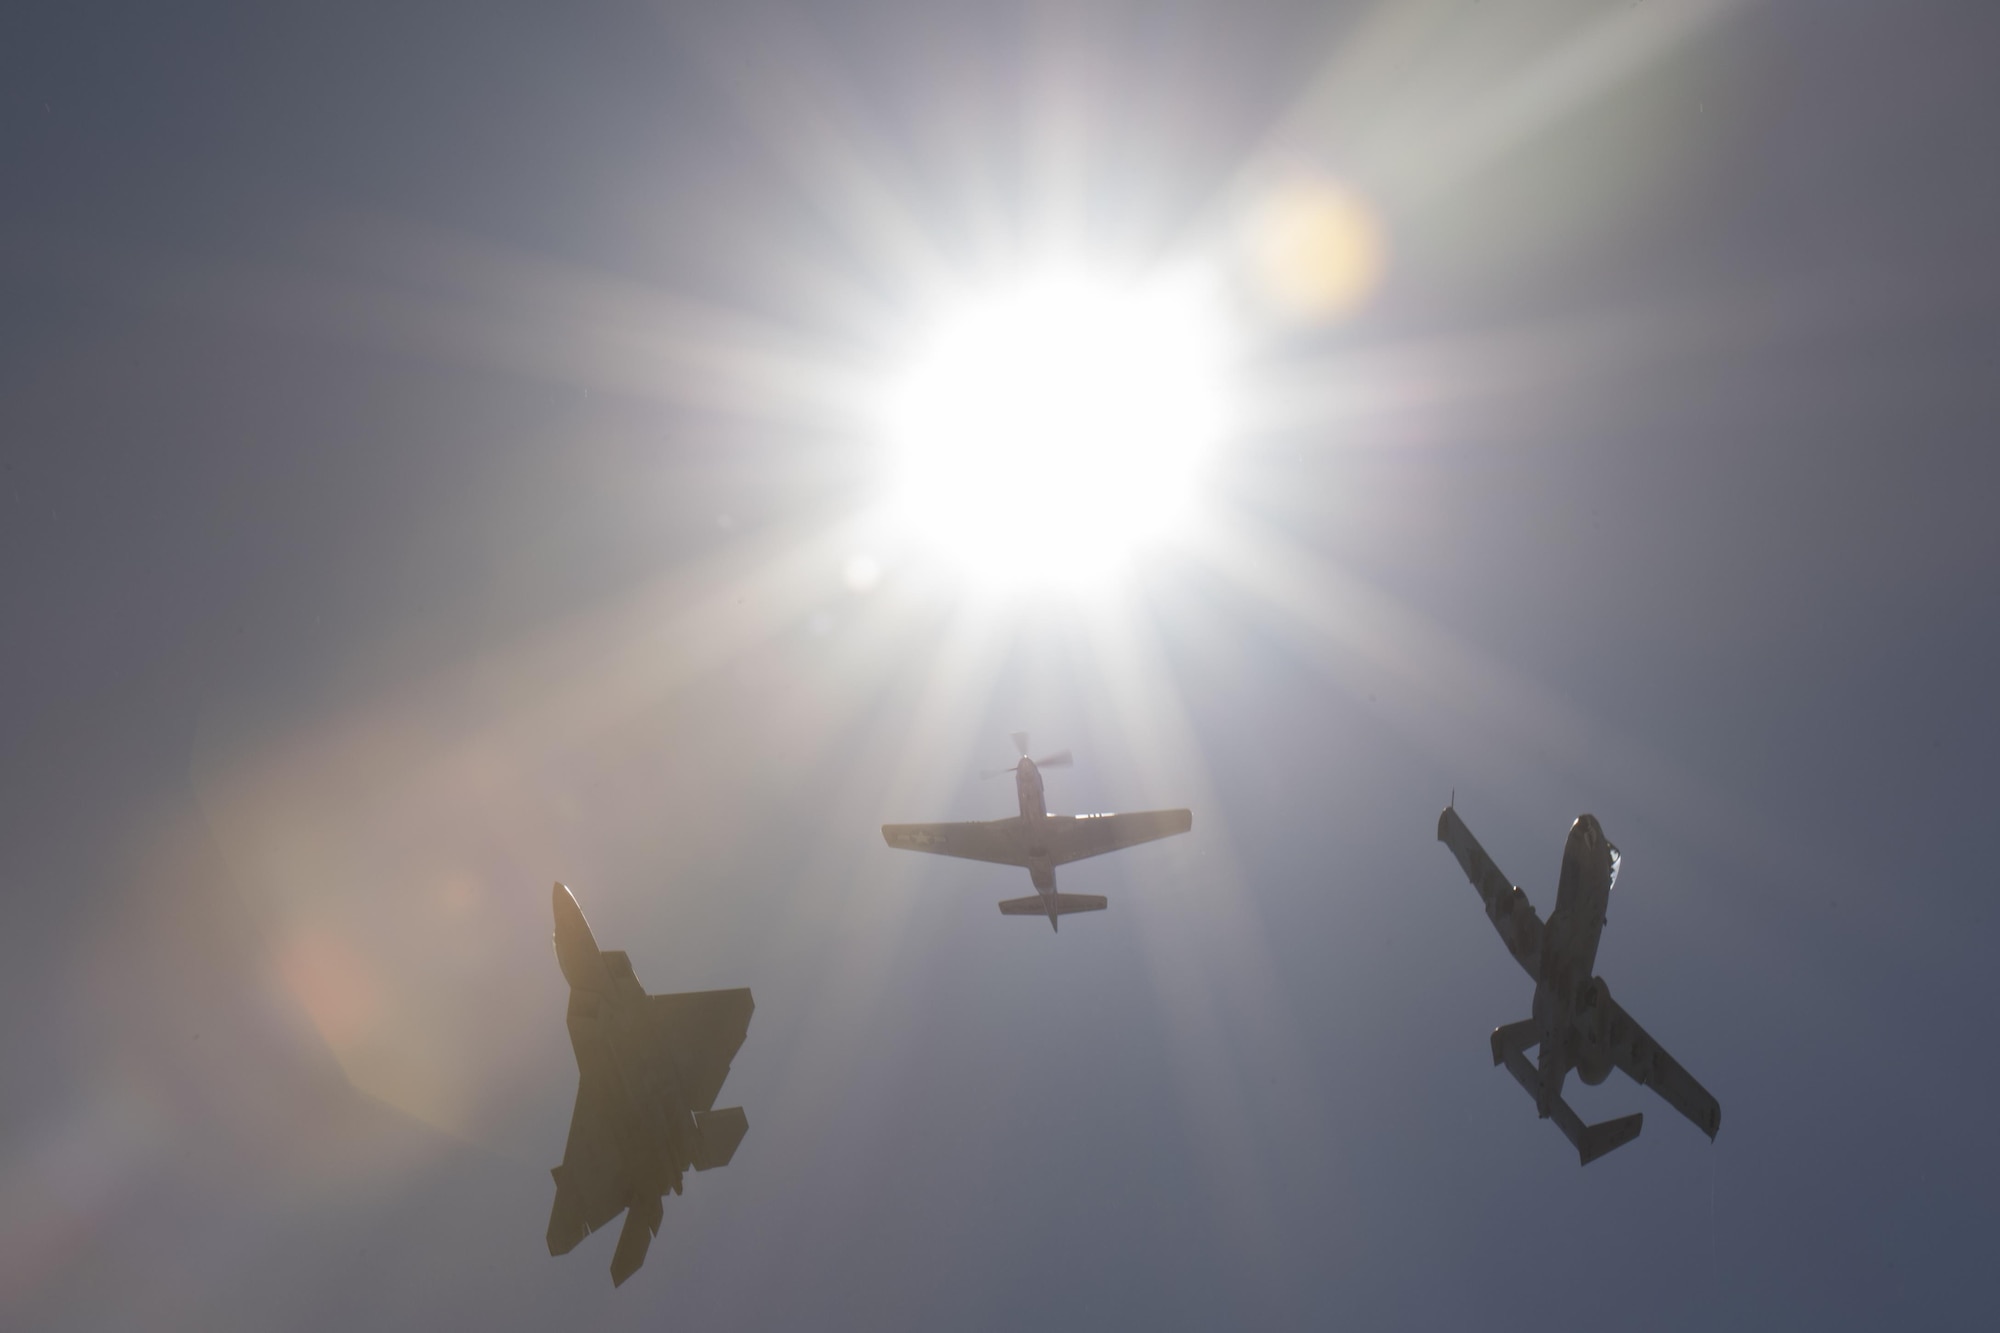 A P-51 Mustang, a F-22 Raptor and an A-10C Thunderbolt II, break formation after completing a heritage flight, Nov. 3, 2017, at Naval Air Station Jacksonville, Fla. The U.S. Air Force Heritage Flight program showcases past, present and future aircraft to spectators at air shows around the world. (U.S. Air Force photo by Staff Sgt. Eric Summers Jr.)